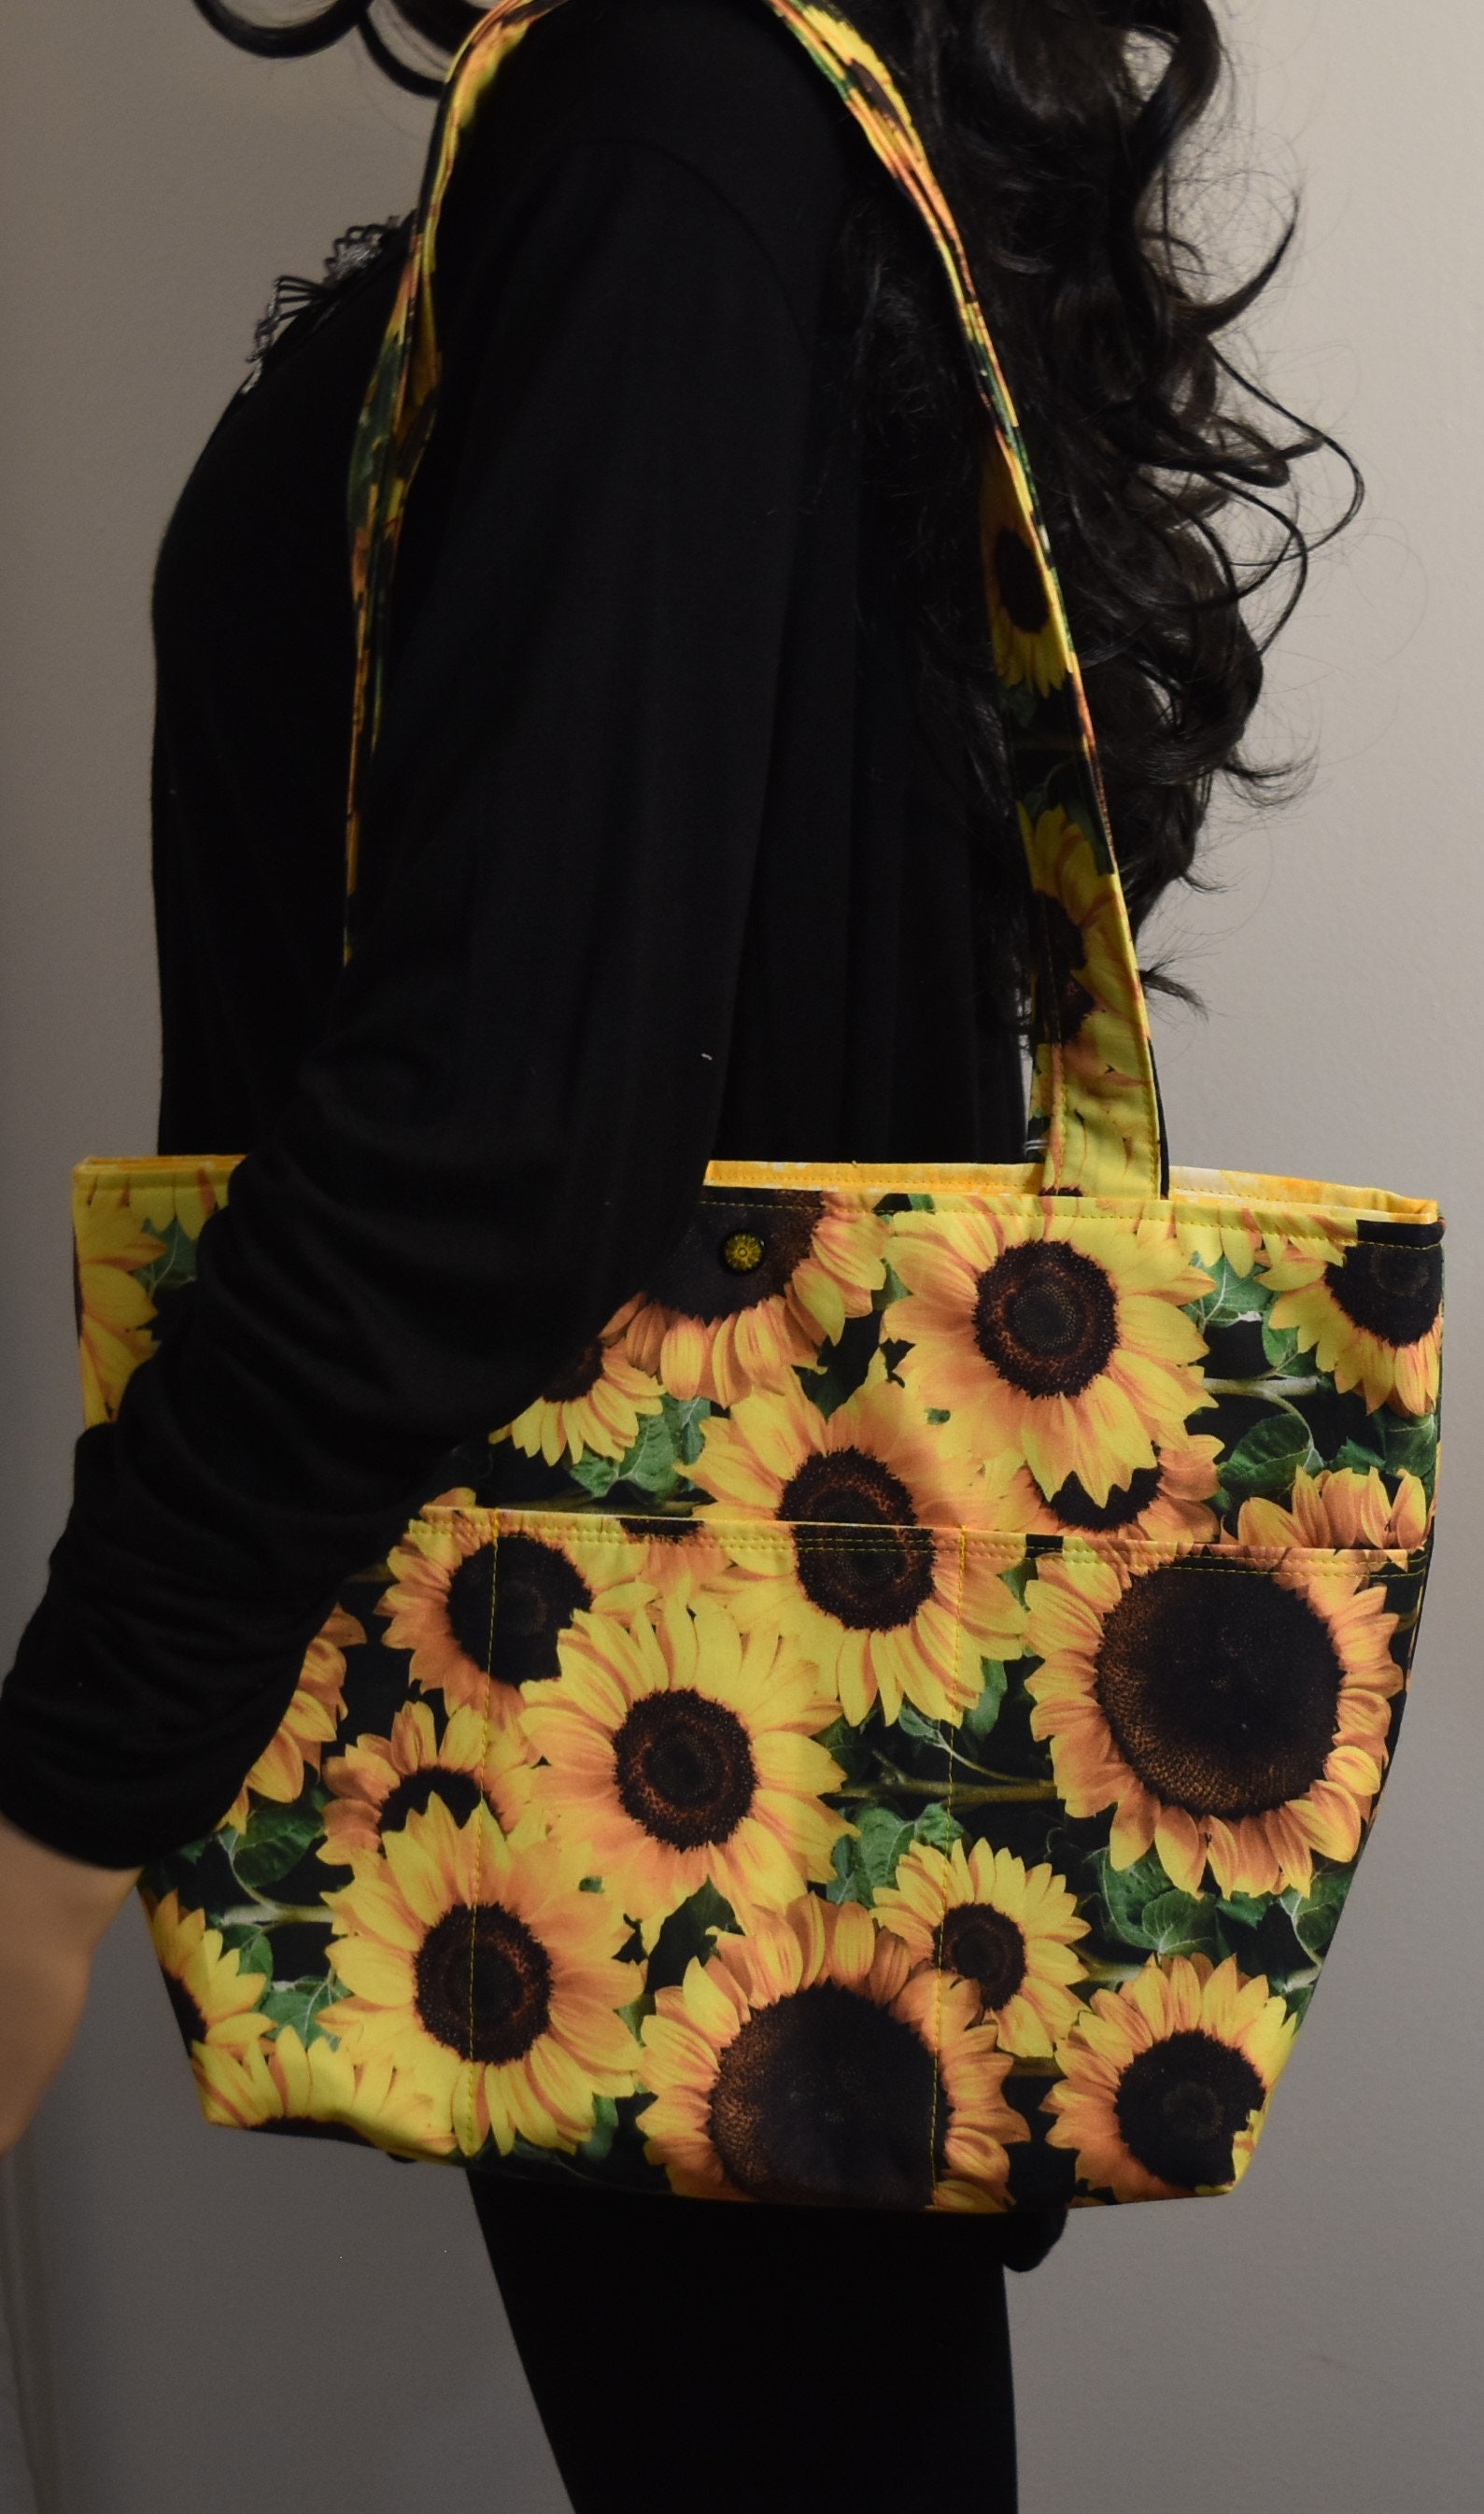 Sunflower Tote Bag Purse | Etsy